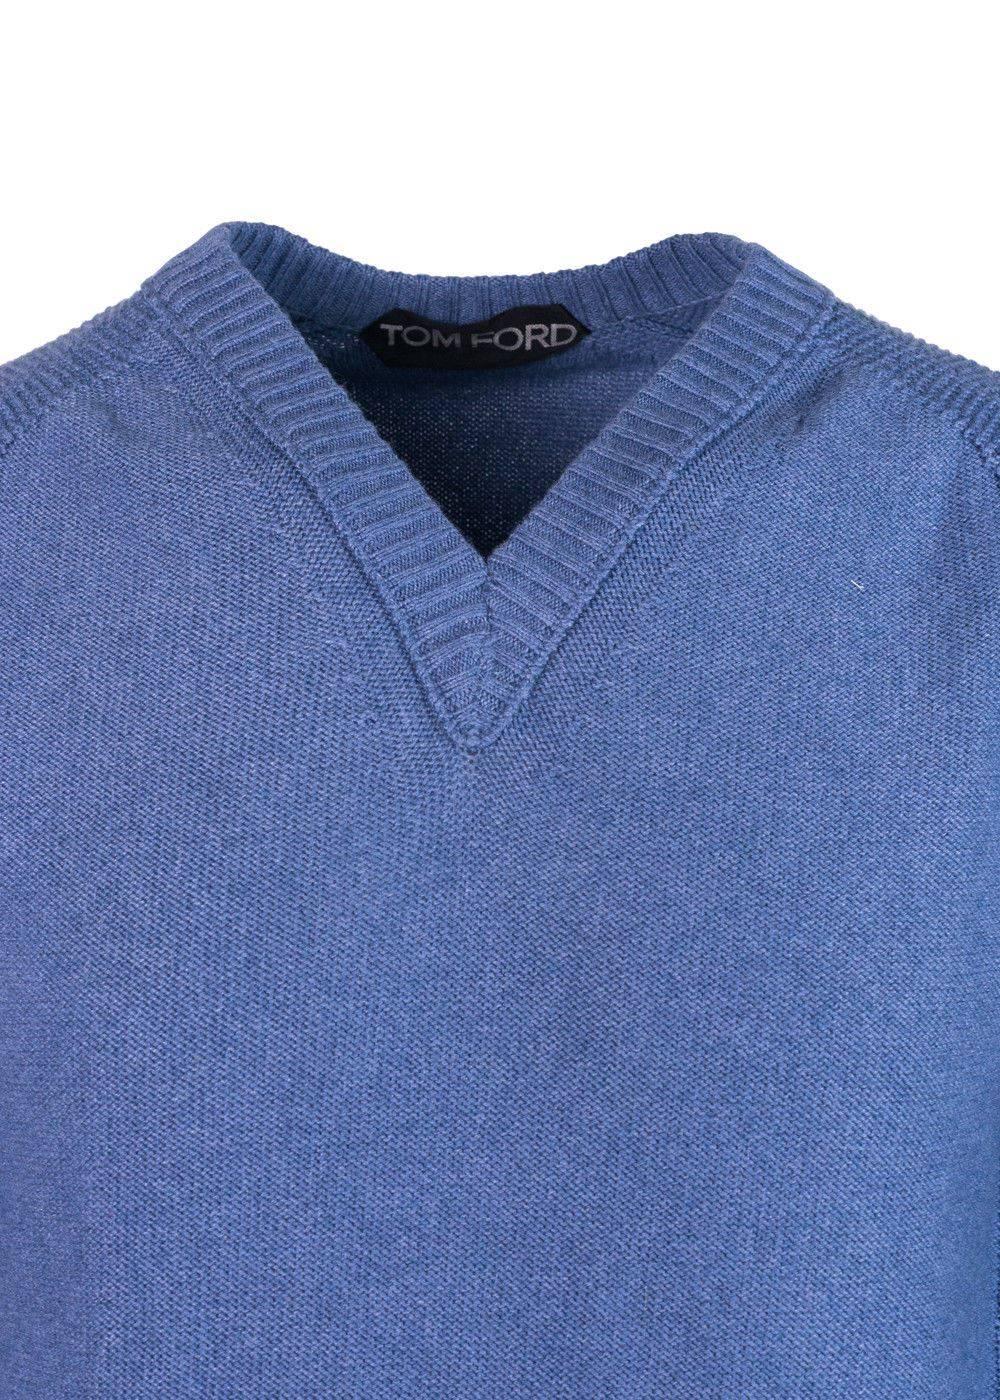 Tom Ford Cotton Blend Knitted V Neck Raglan Sweater In New Condition For Sale In Brooklyn, NY